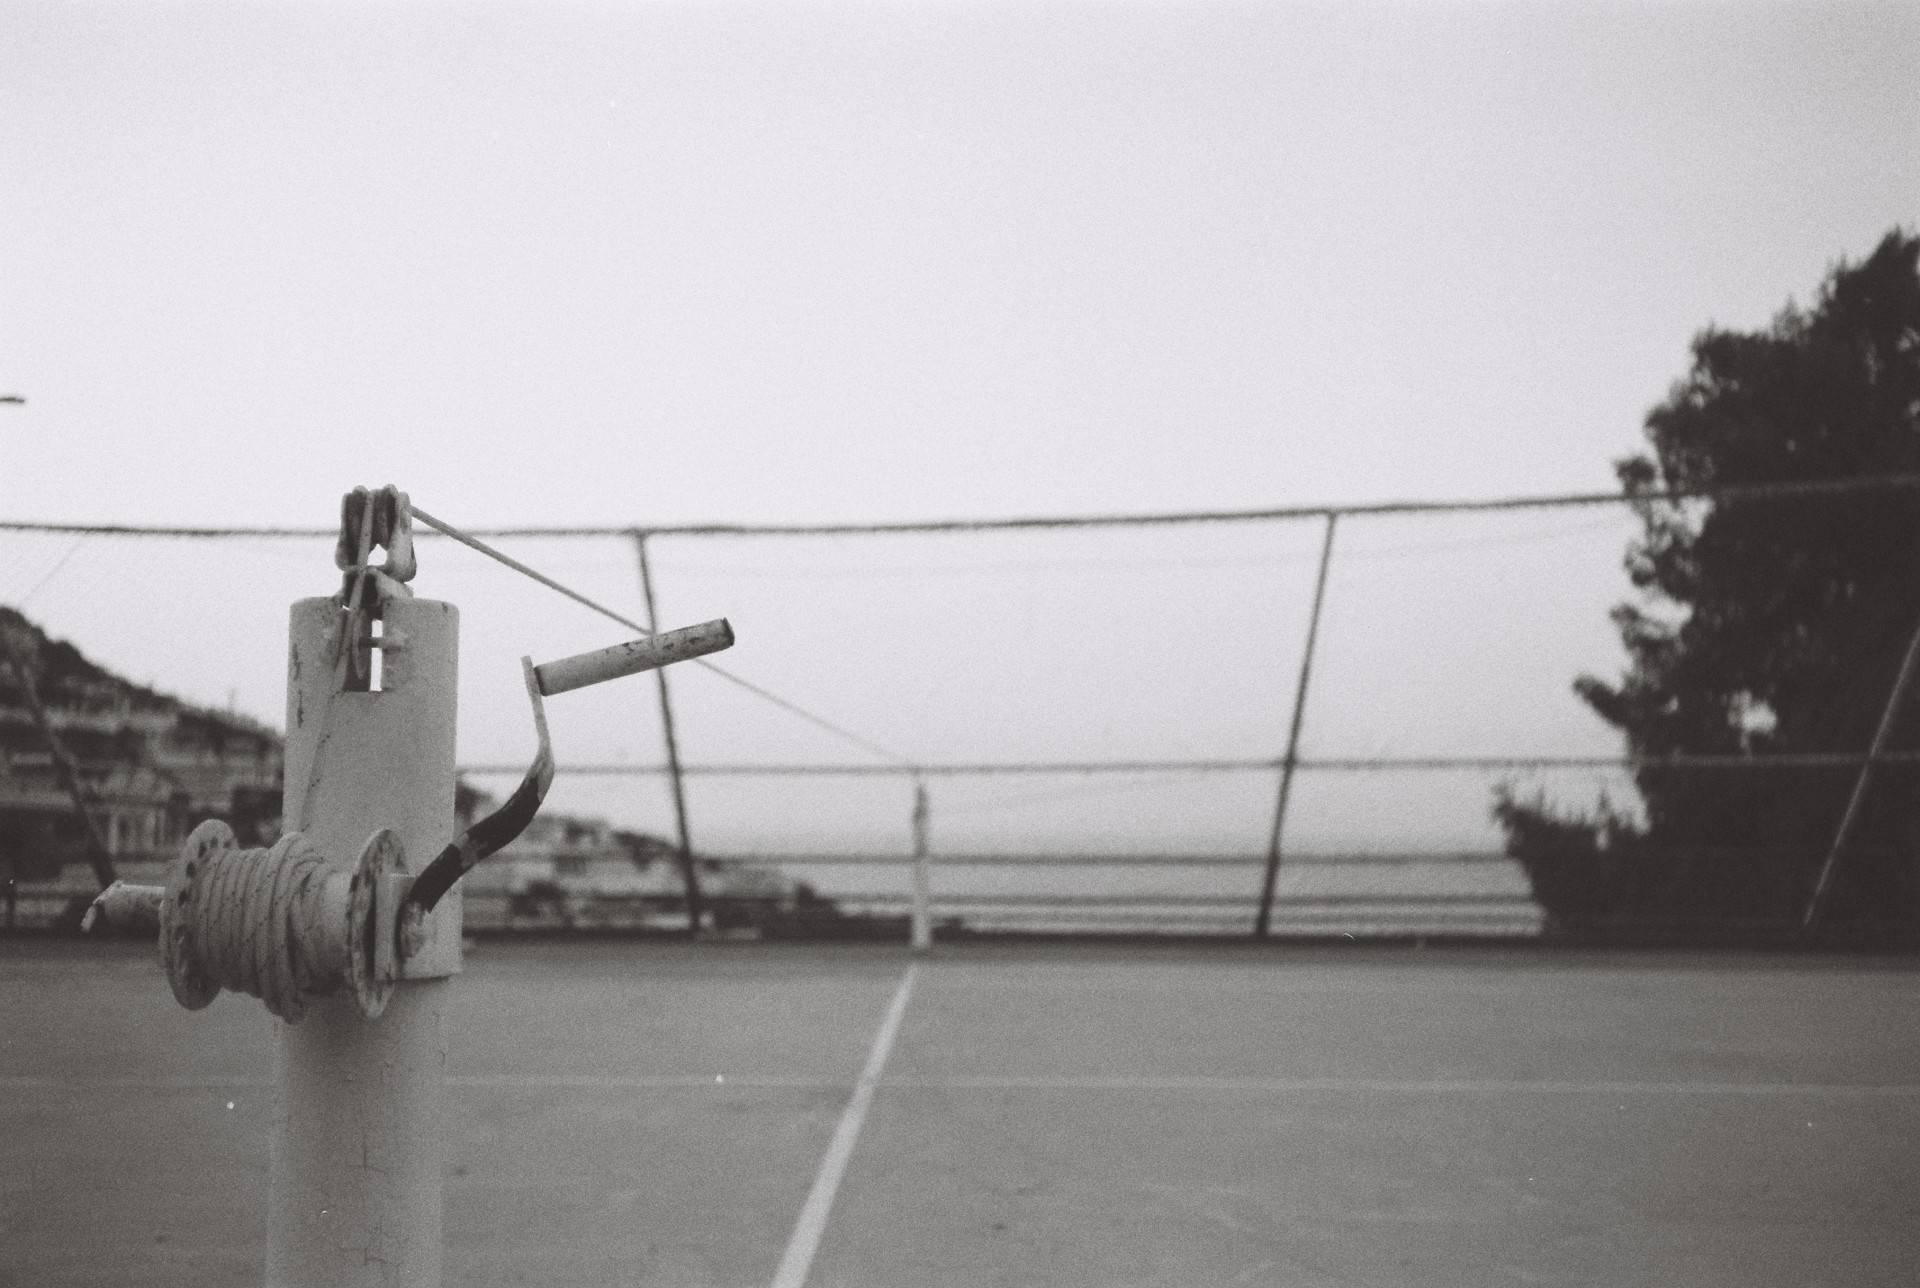 an unmaintained tennis court with the net line stretched but the net itself is missing, sea and clear sky is seen through the leaning barrier on the back